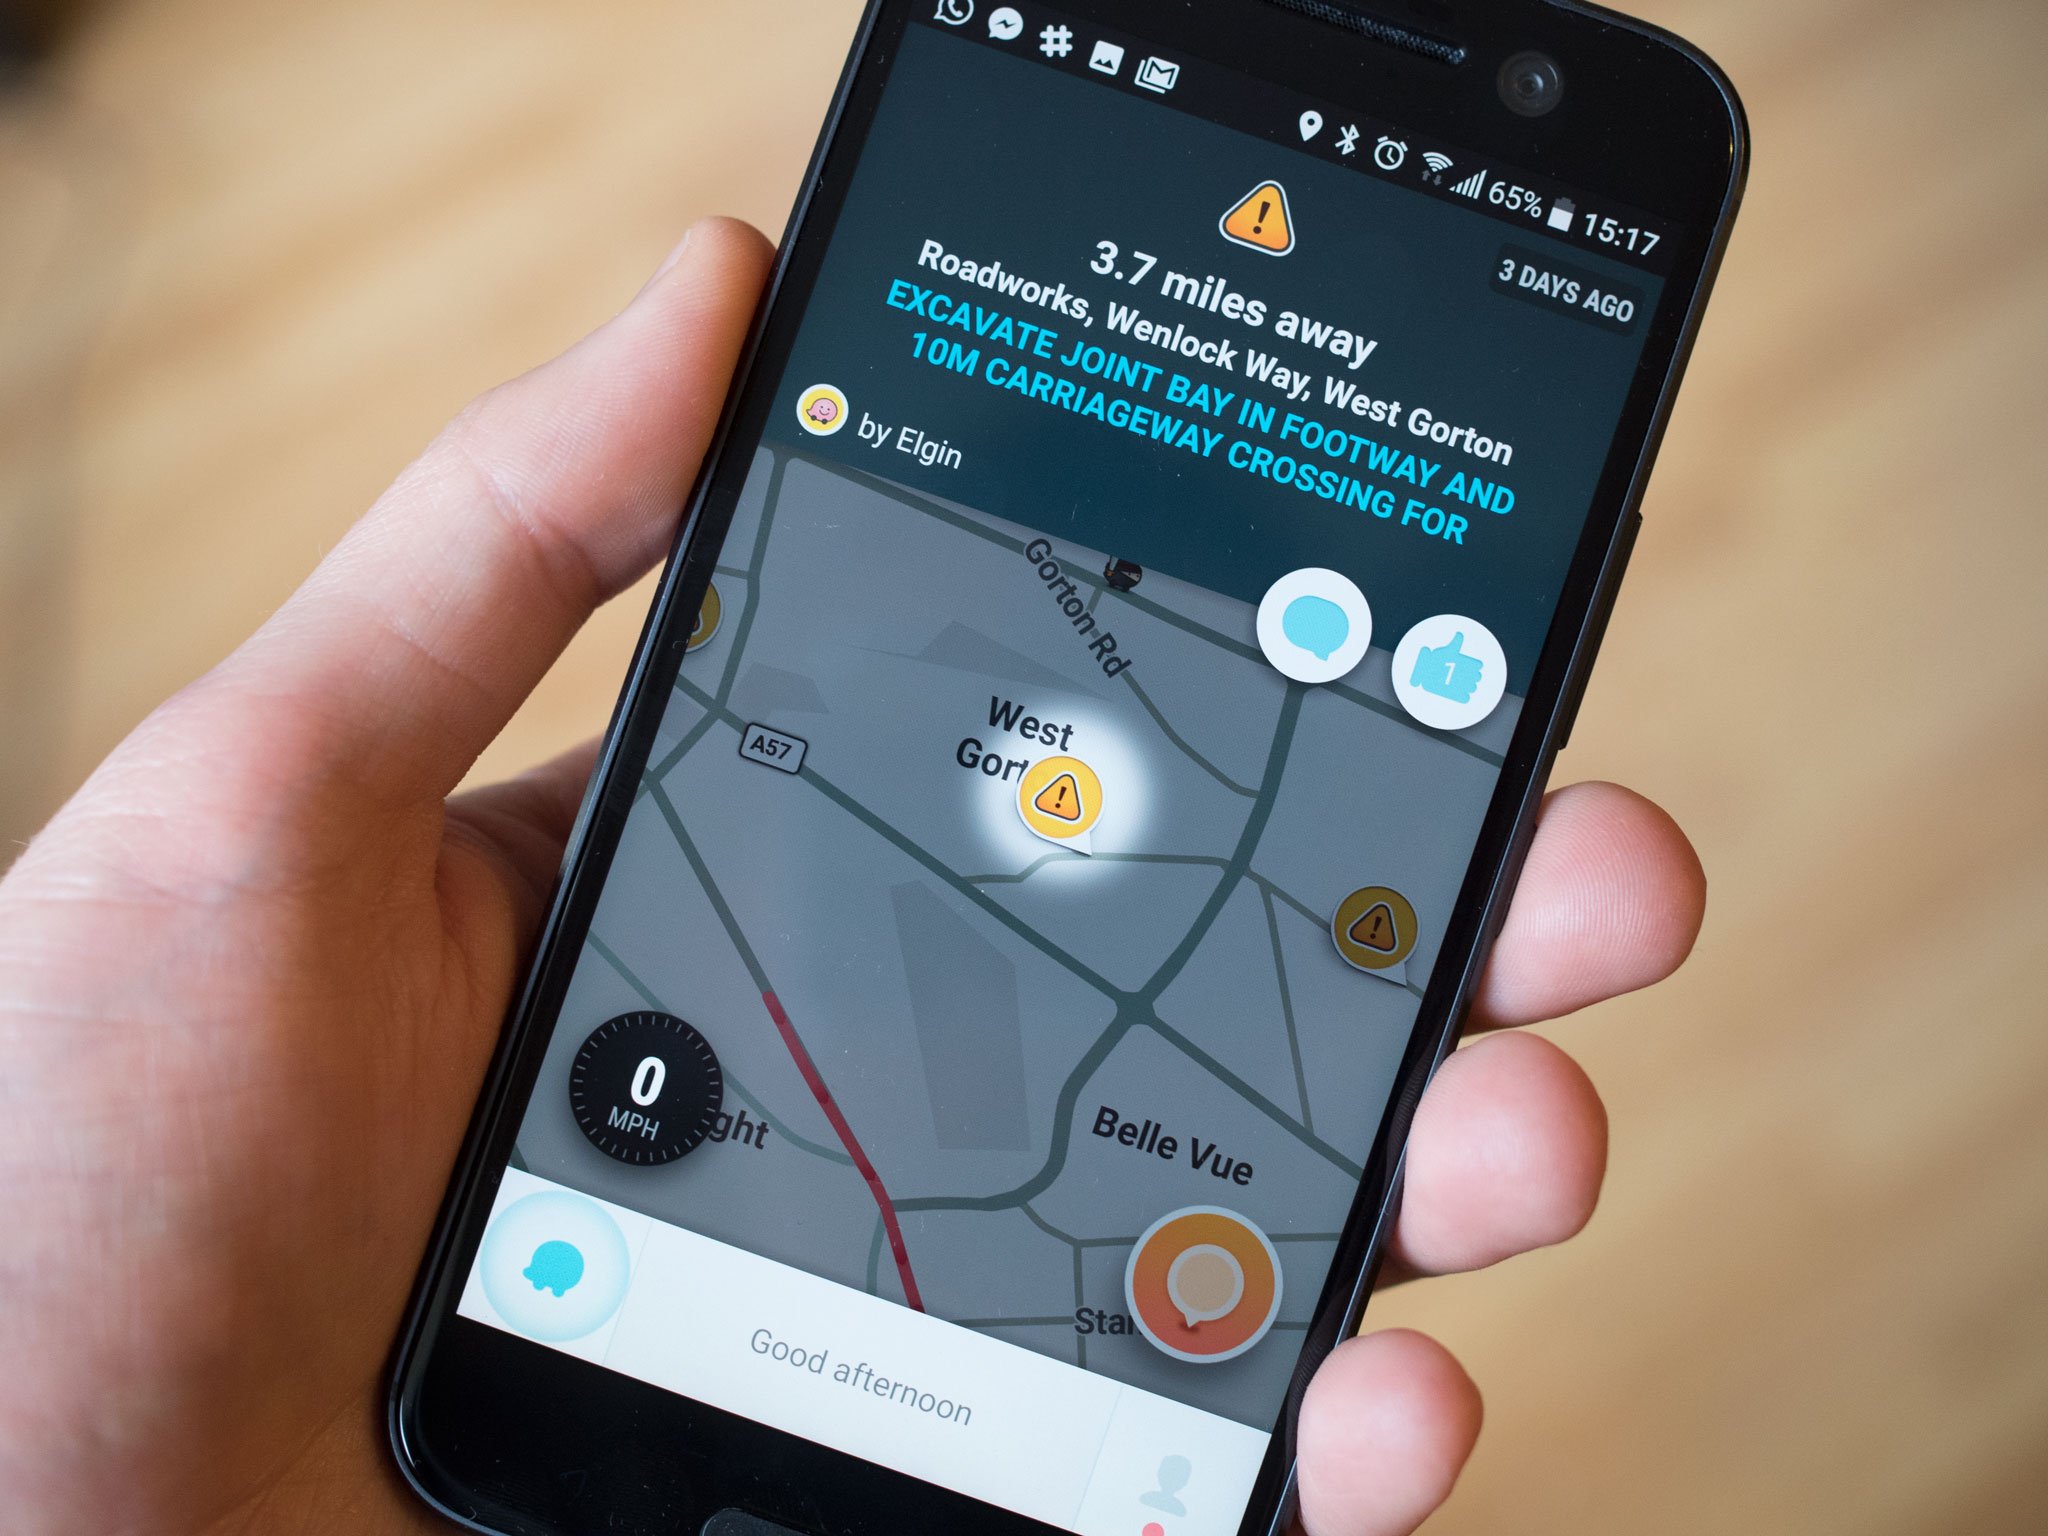 FTC to review Google’s 2013 Waze acquisition as part of its antitrust sweep thumbnail